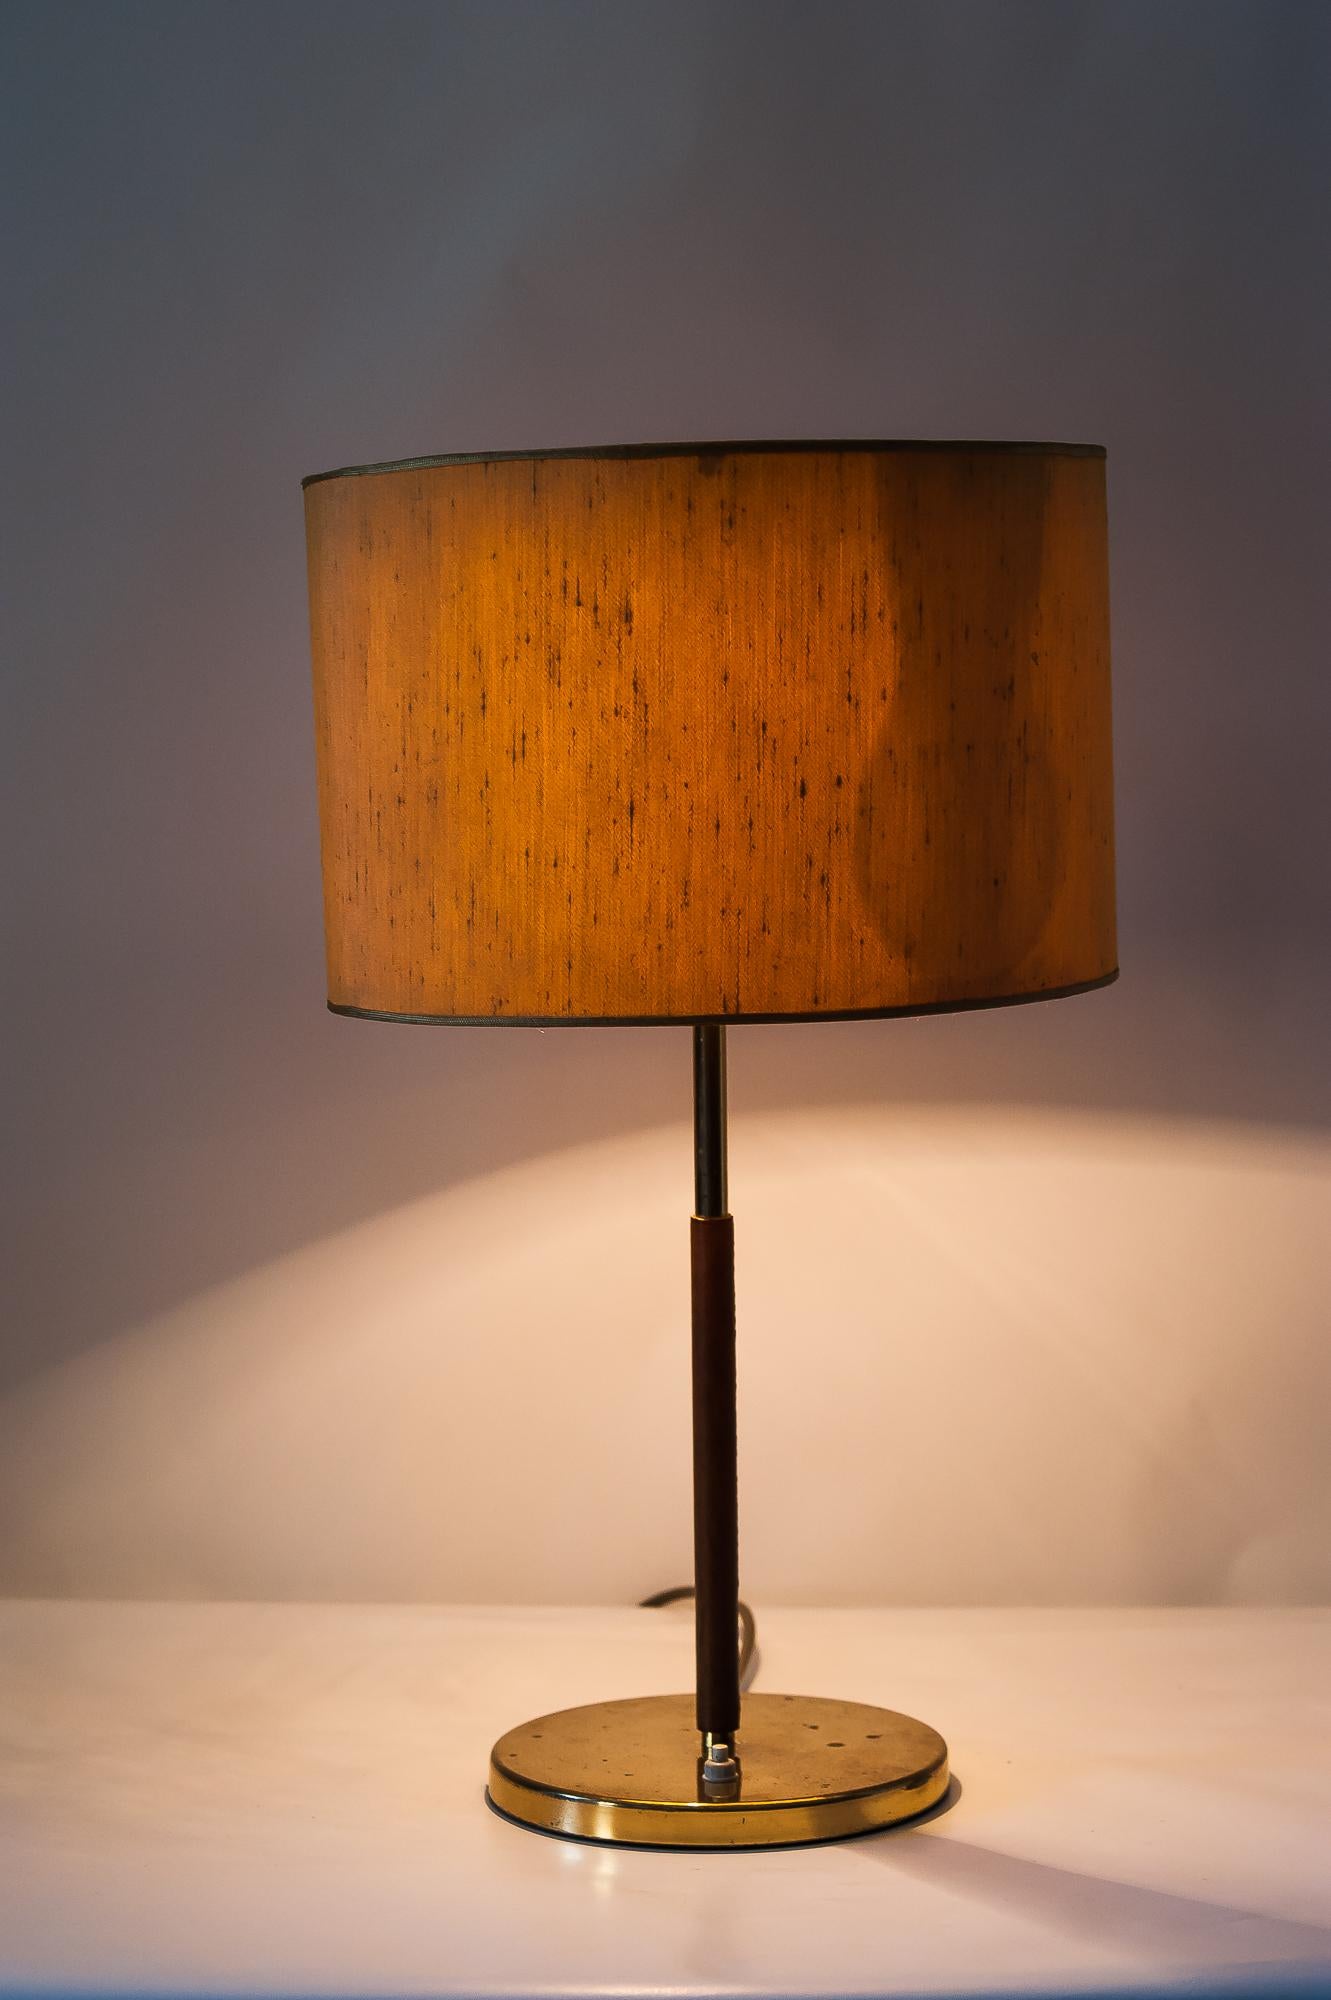 Kalmar Table Lamps with Leather Covered Stem and Yellow Shade, Austria, 1950s (Messing)